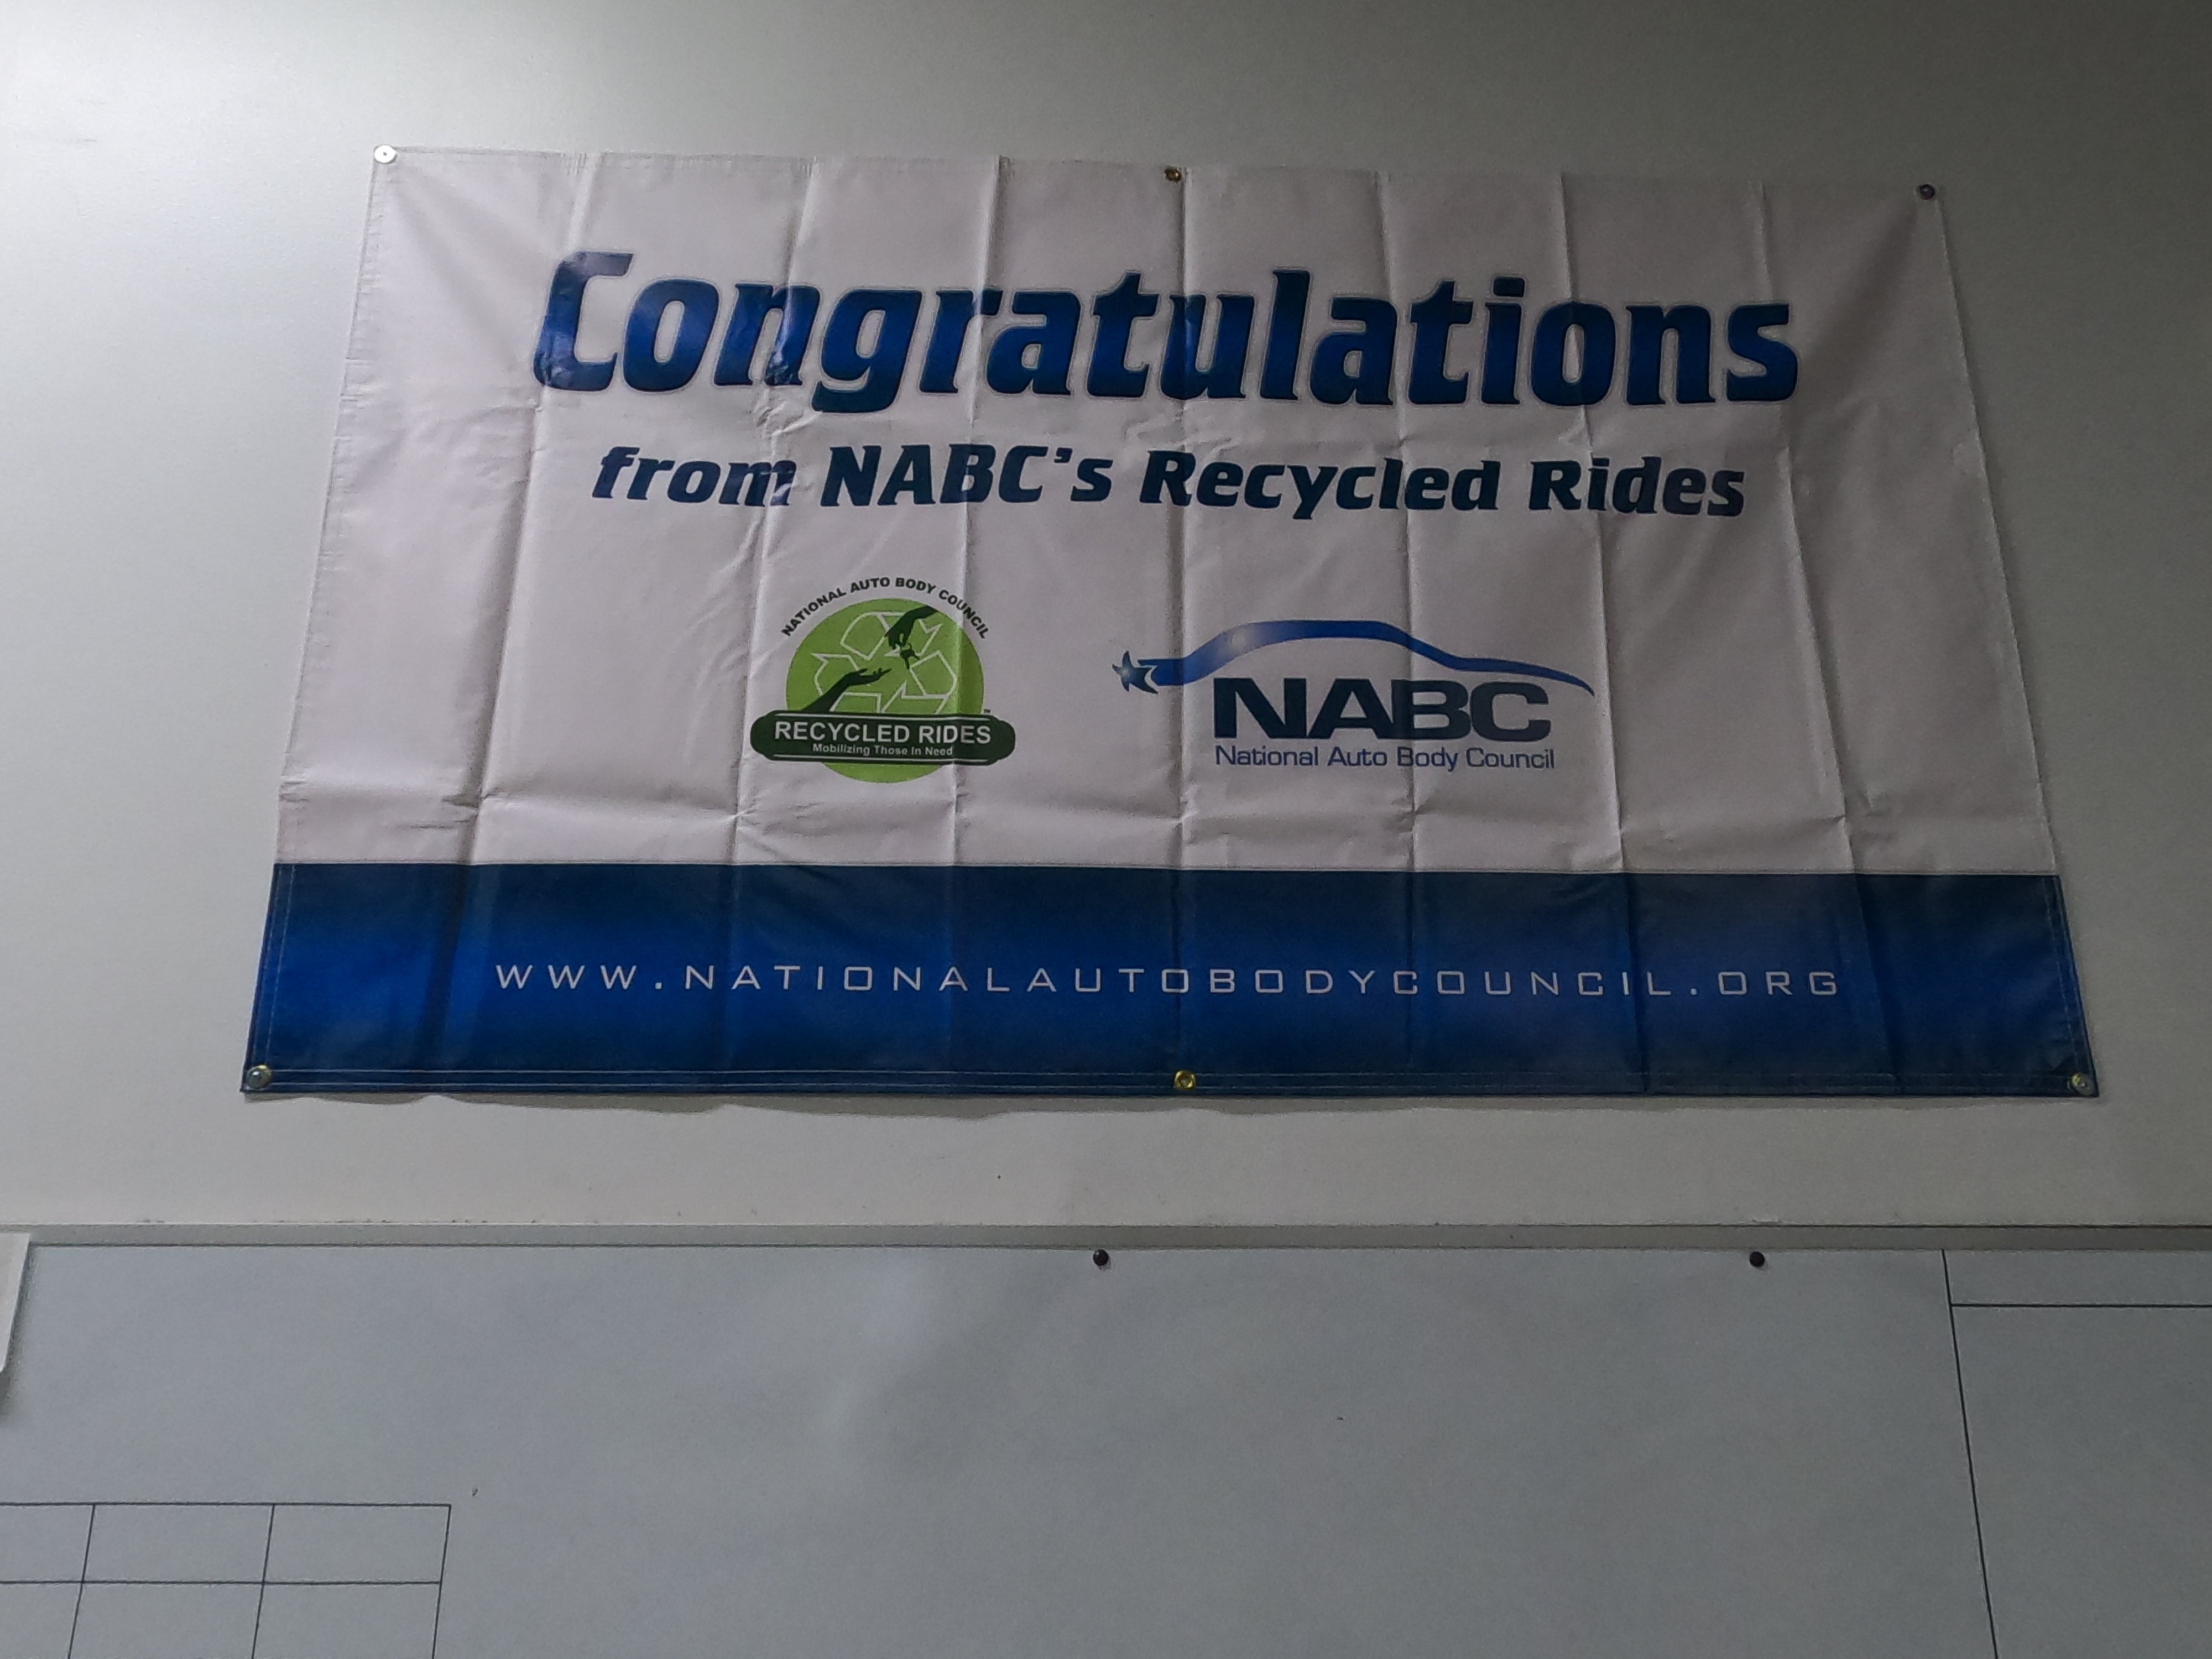 Congratulations from NABC's Recycled Rides